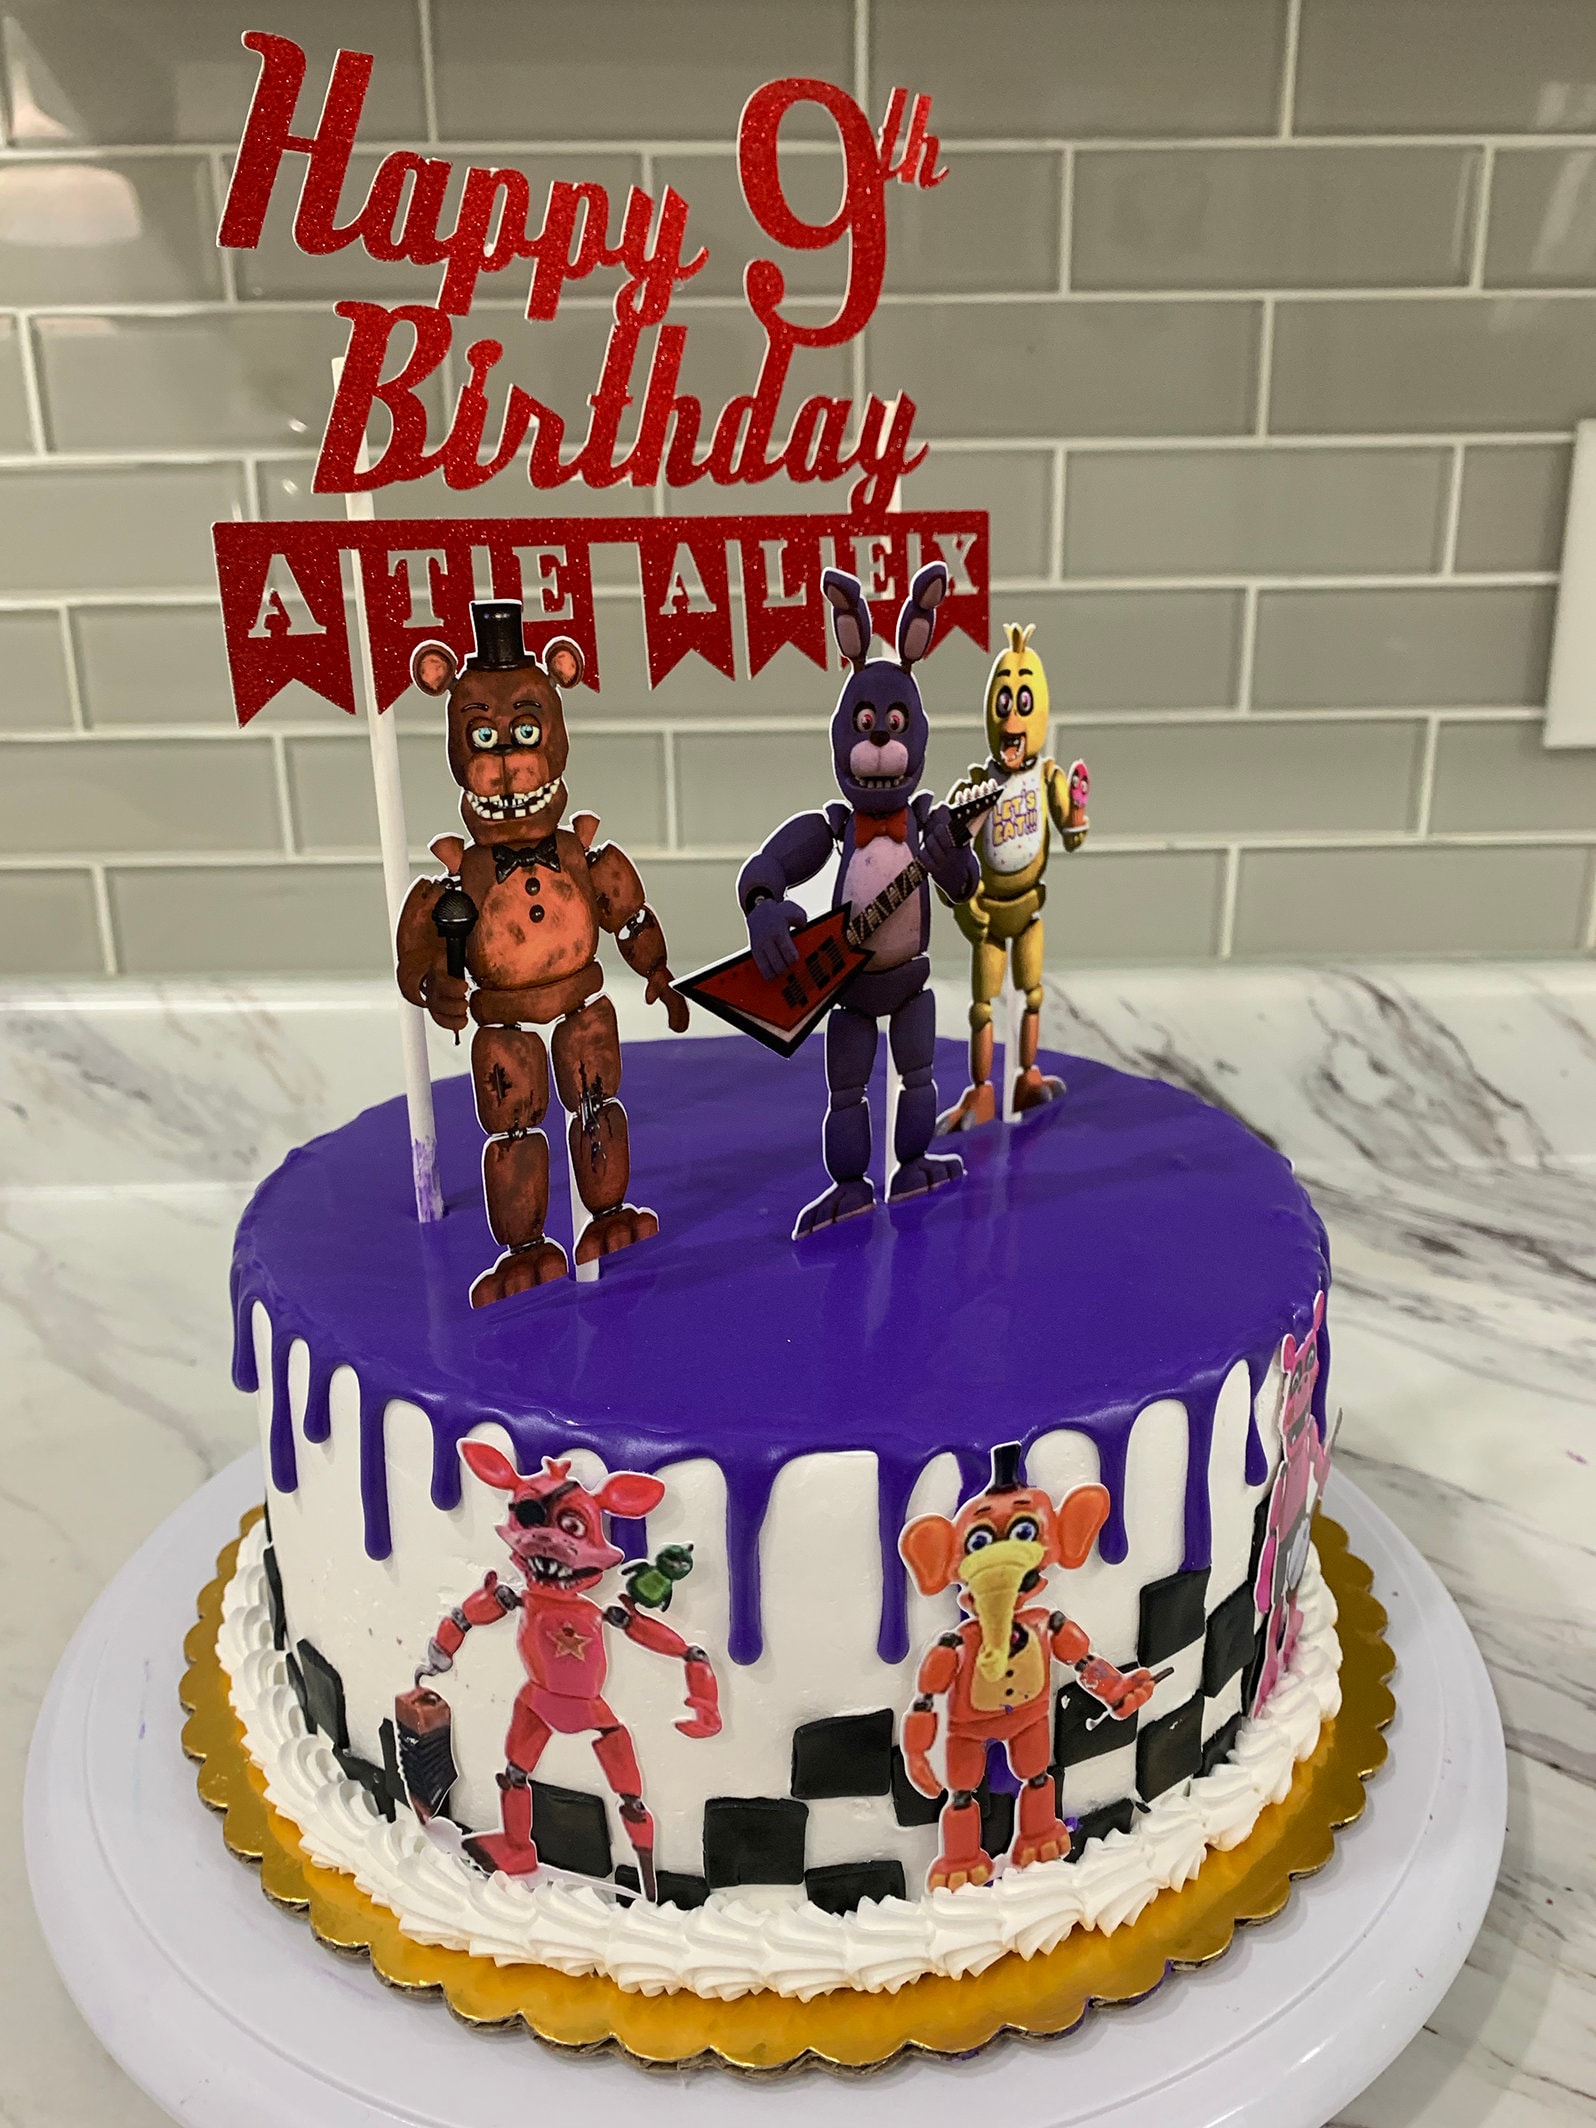 Five Nights at Freddy's - 3D Cake Topper - Message us on IG! #chicago